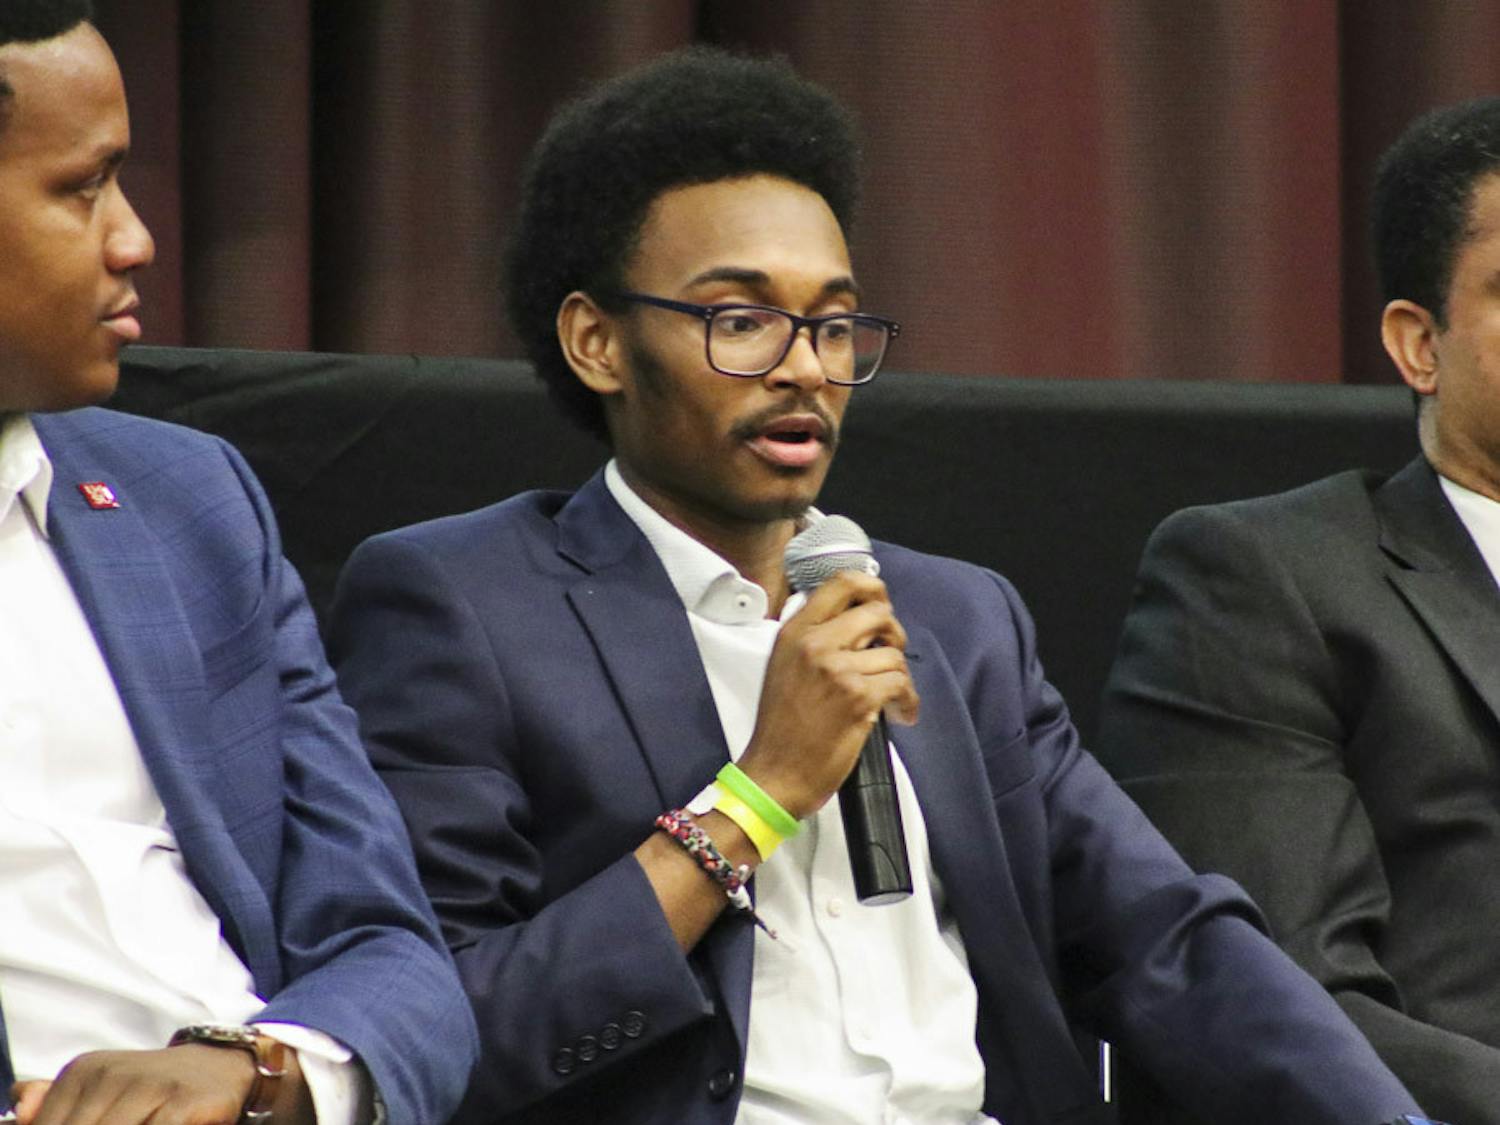 Aon Insurance Commercial Specialist and Diversity Consultant Josh Pearson talks about the importance of diversity in the workspace during the Alpha Kappa Psi panel in the Russell House Ballroom on Feb. 20, 2023. Pearson, a 2021 graduate from USC, told the audience how impressed he was to see such a diverse crowd in attendence of the event.&nbsp;